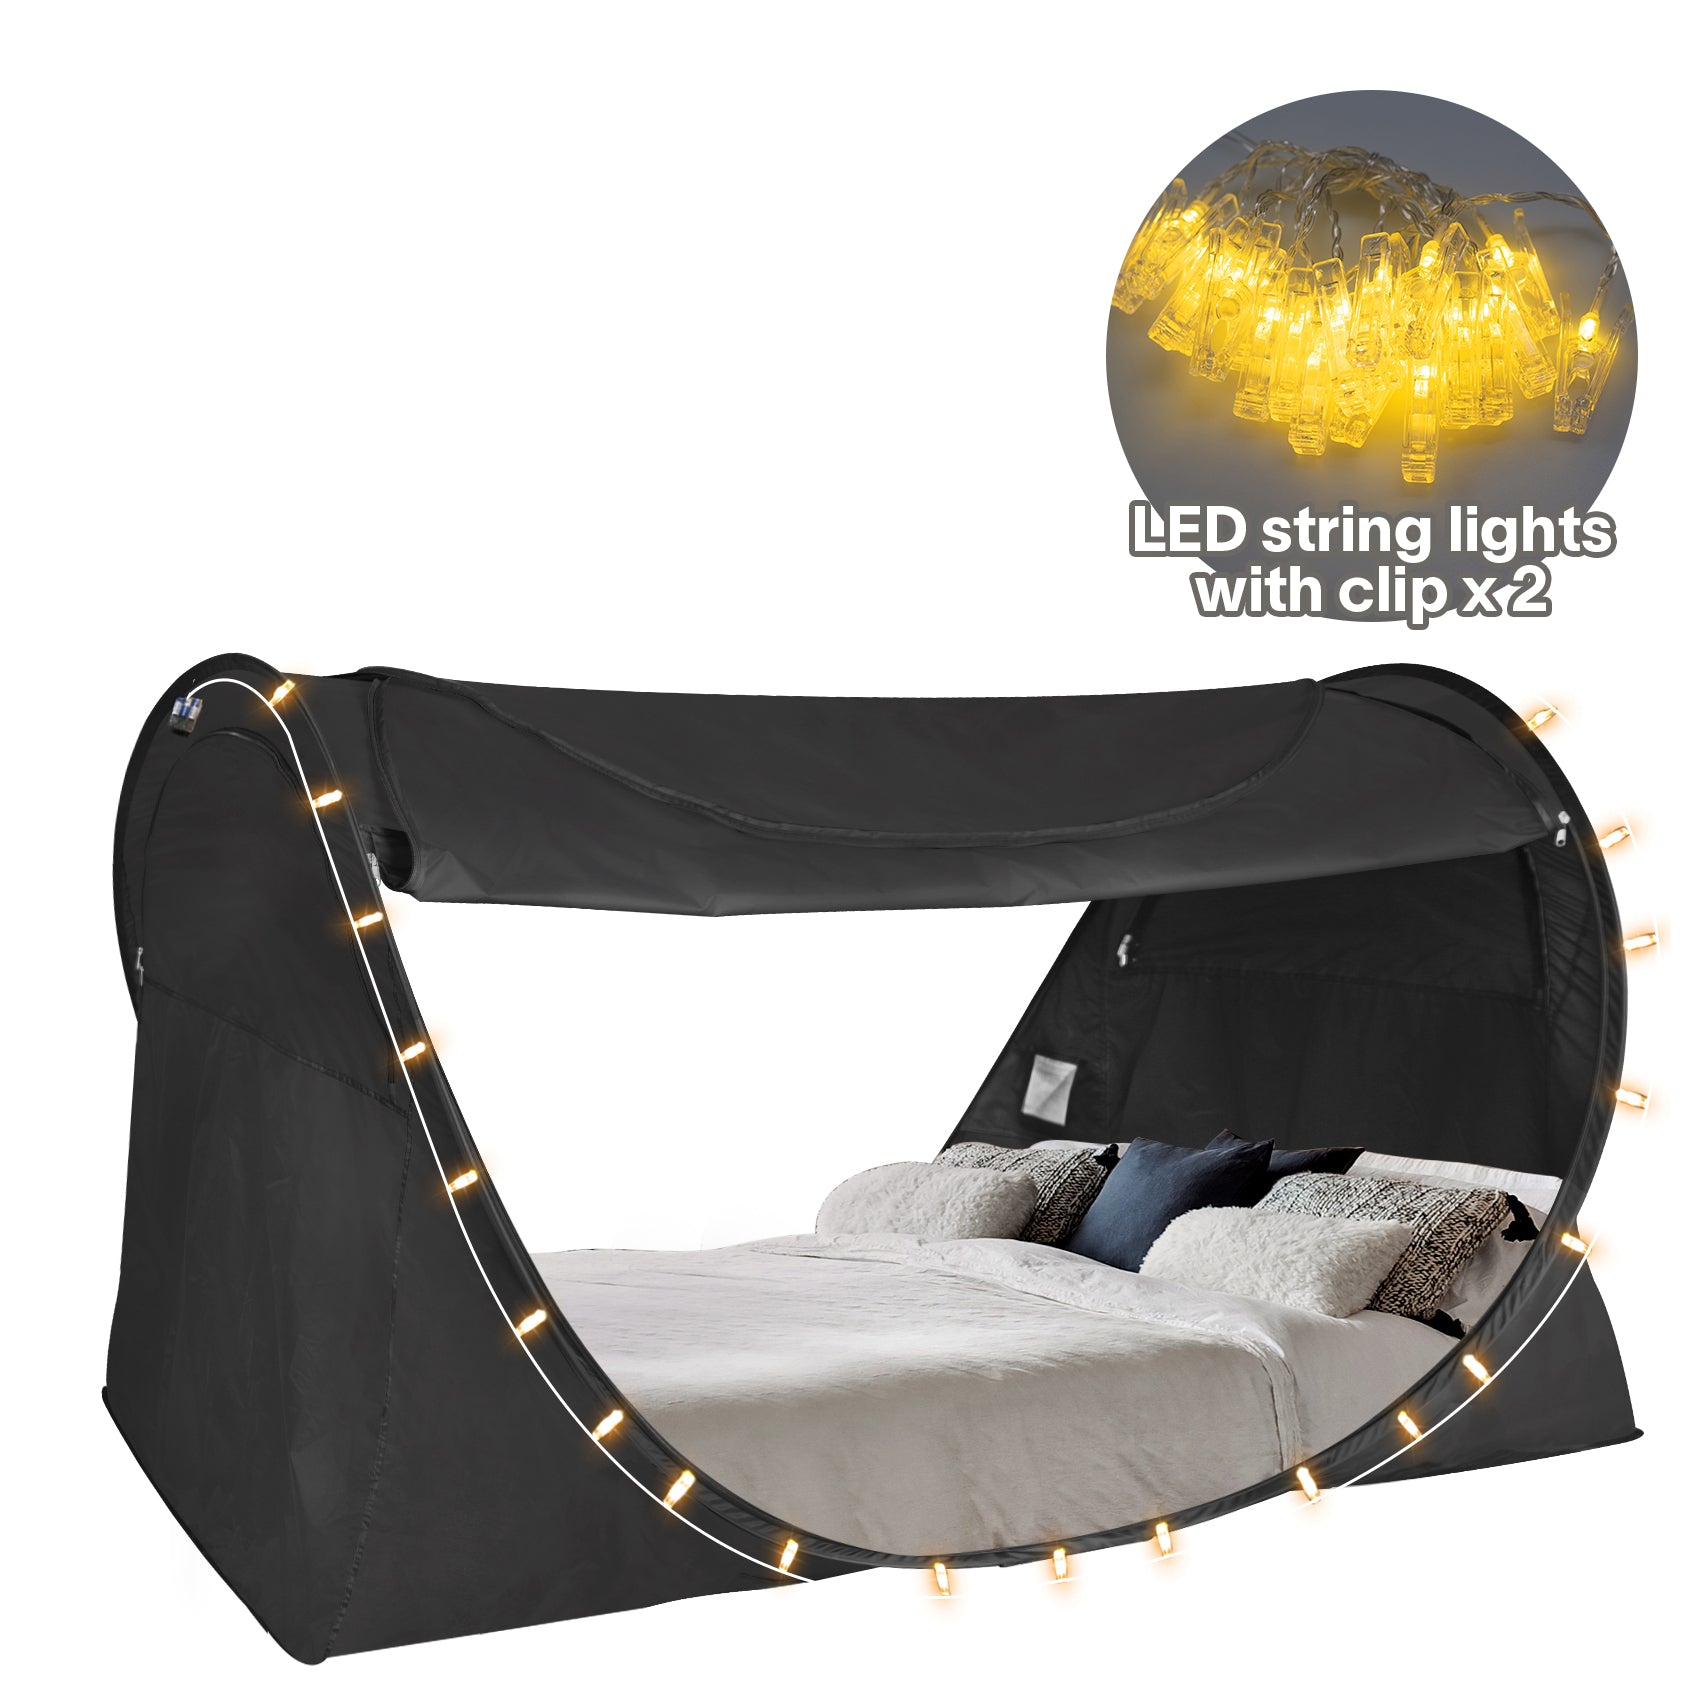 Combo: Alvantor Privacy Bed Tent with LED String Lights - Ideal for Better Sleep and Comfort